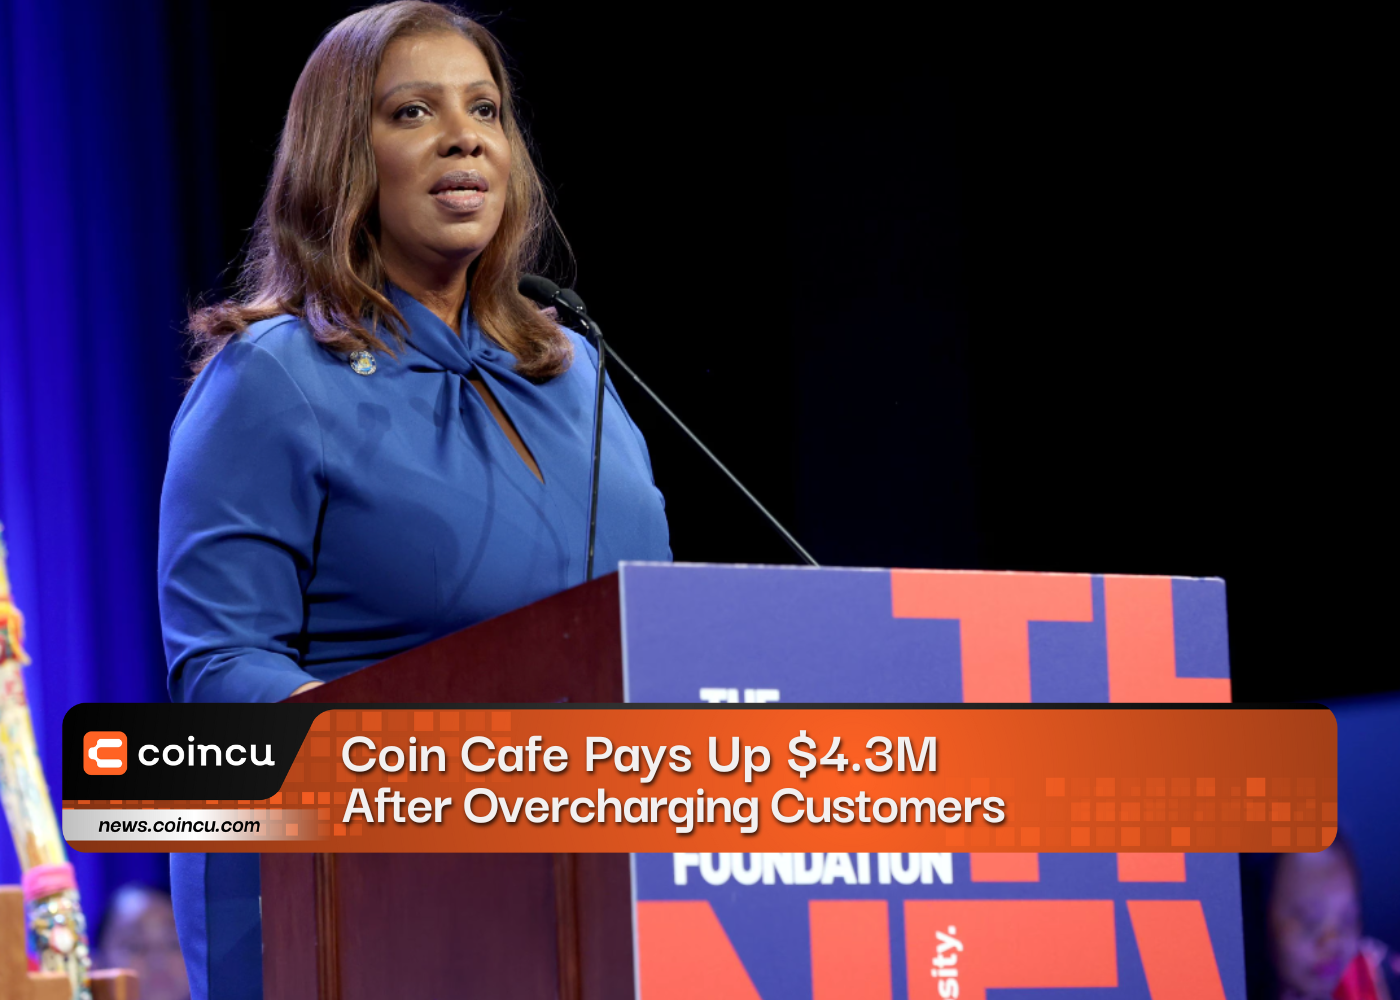 Coin Cafe Pays Up 4.3M